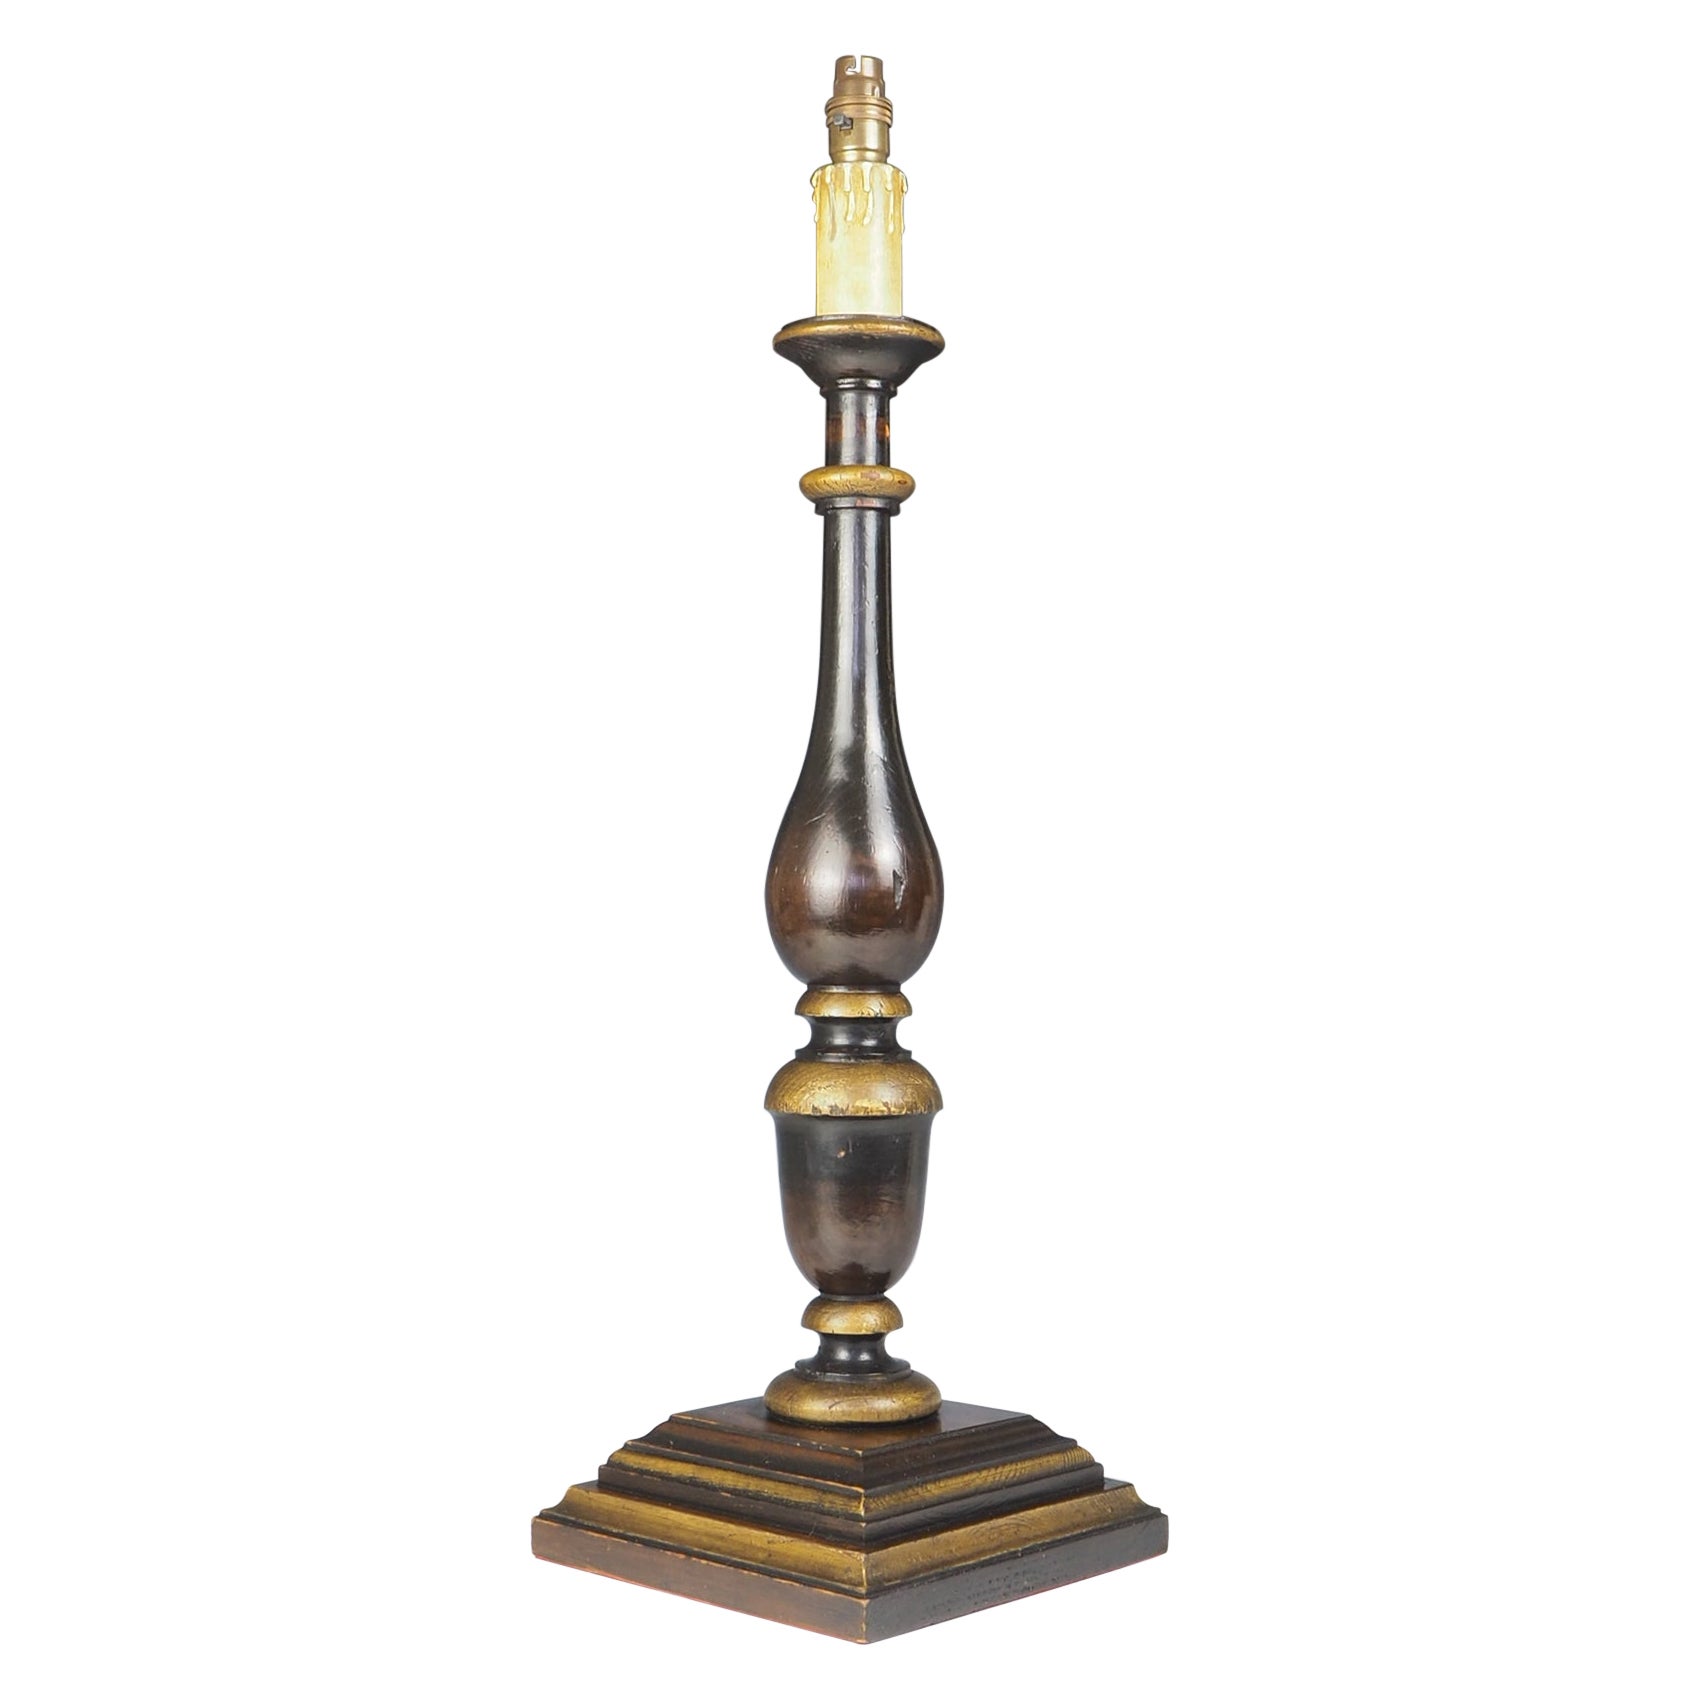 English Country House Antique Table Lamp For Sale